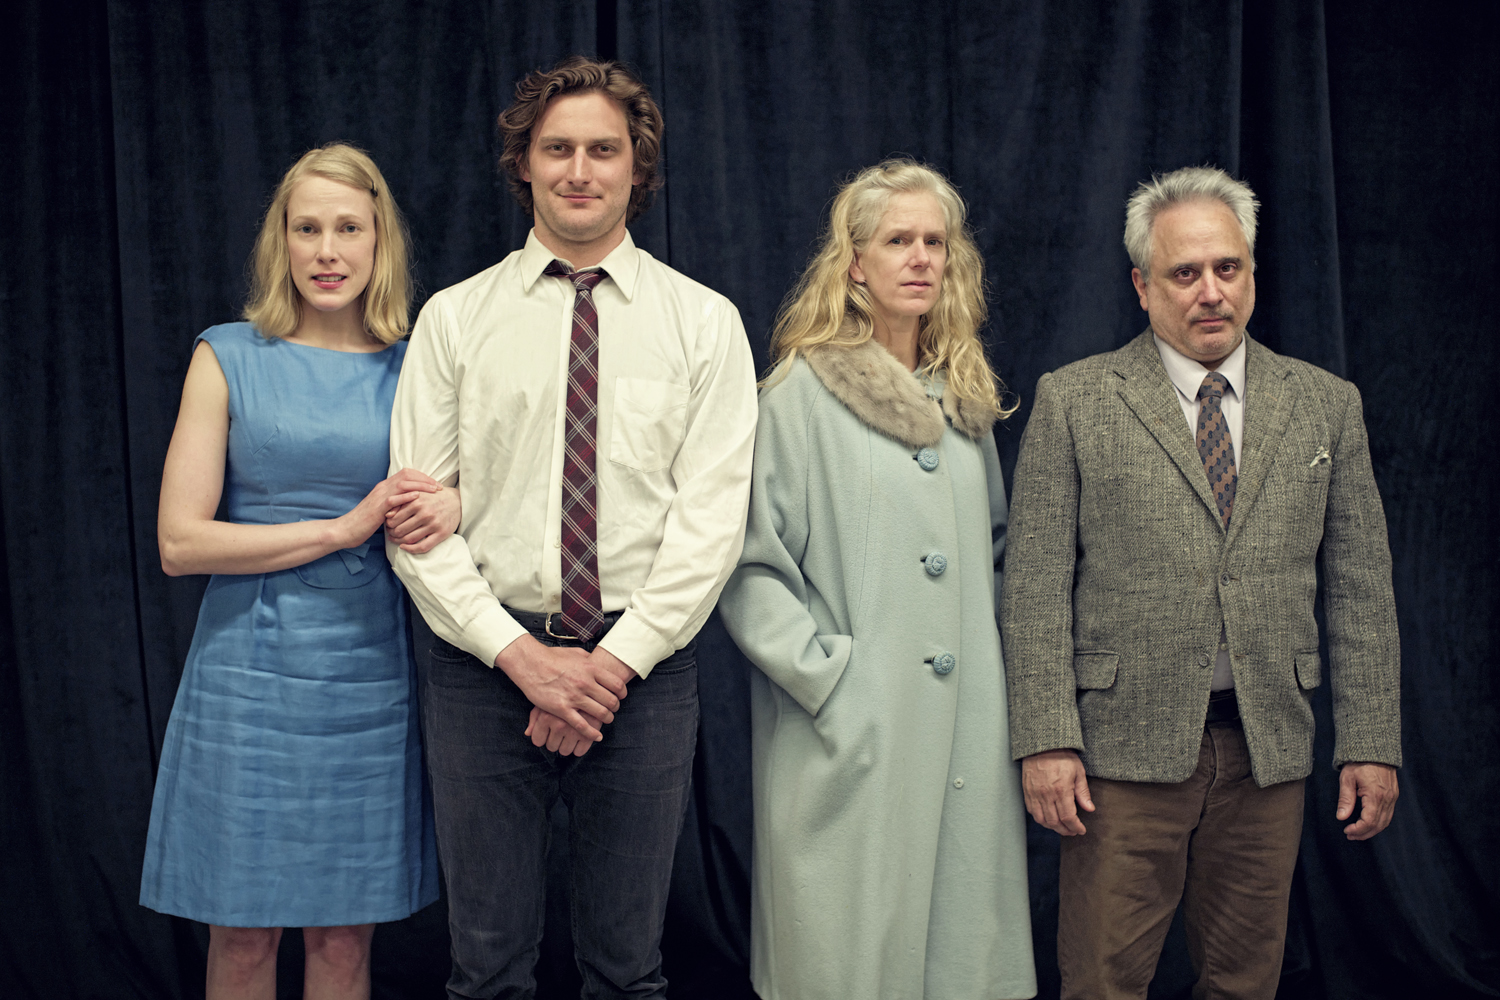 The Cast of Who's Afraid of Virginia Woolf?